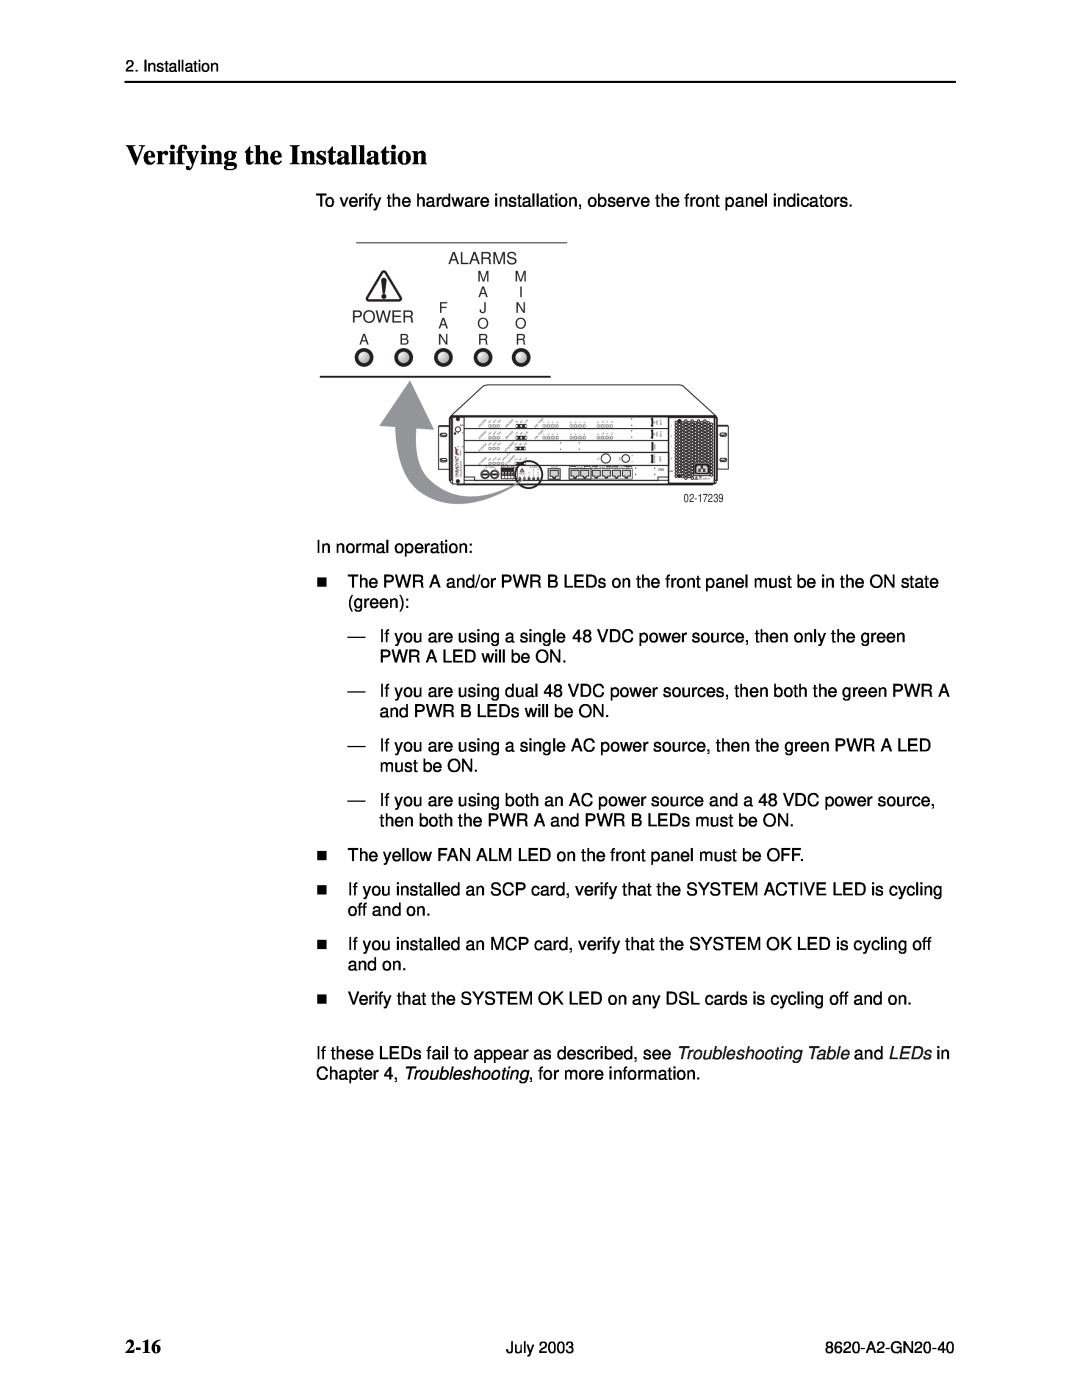 Paradyne Hotwire 8620 GranDSLAM Installation Guide manual Verifying the Installation, 2-16, Alarms 